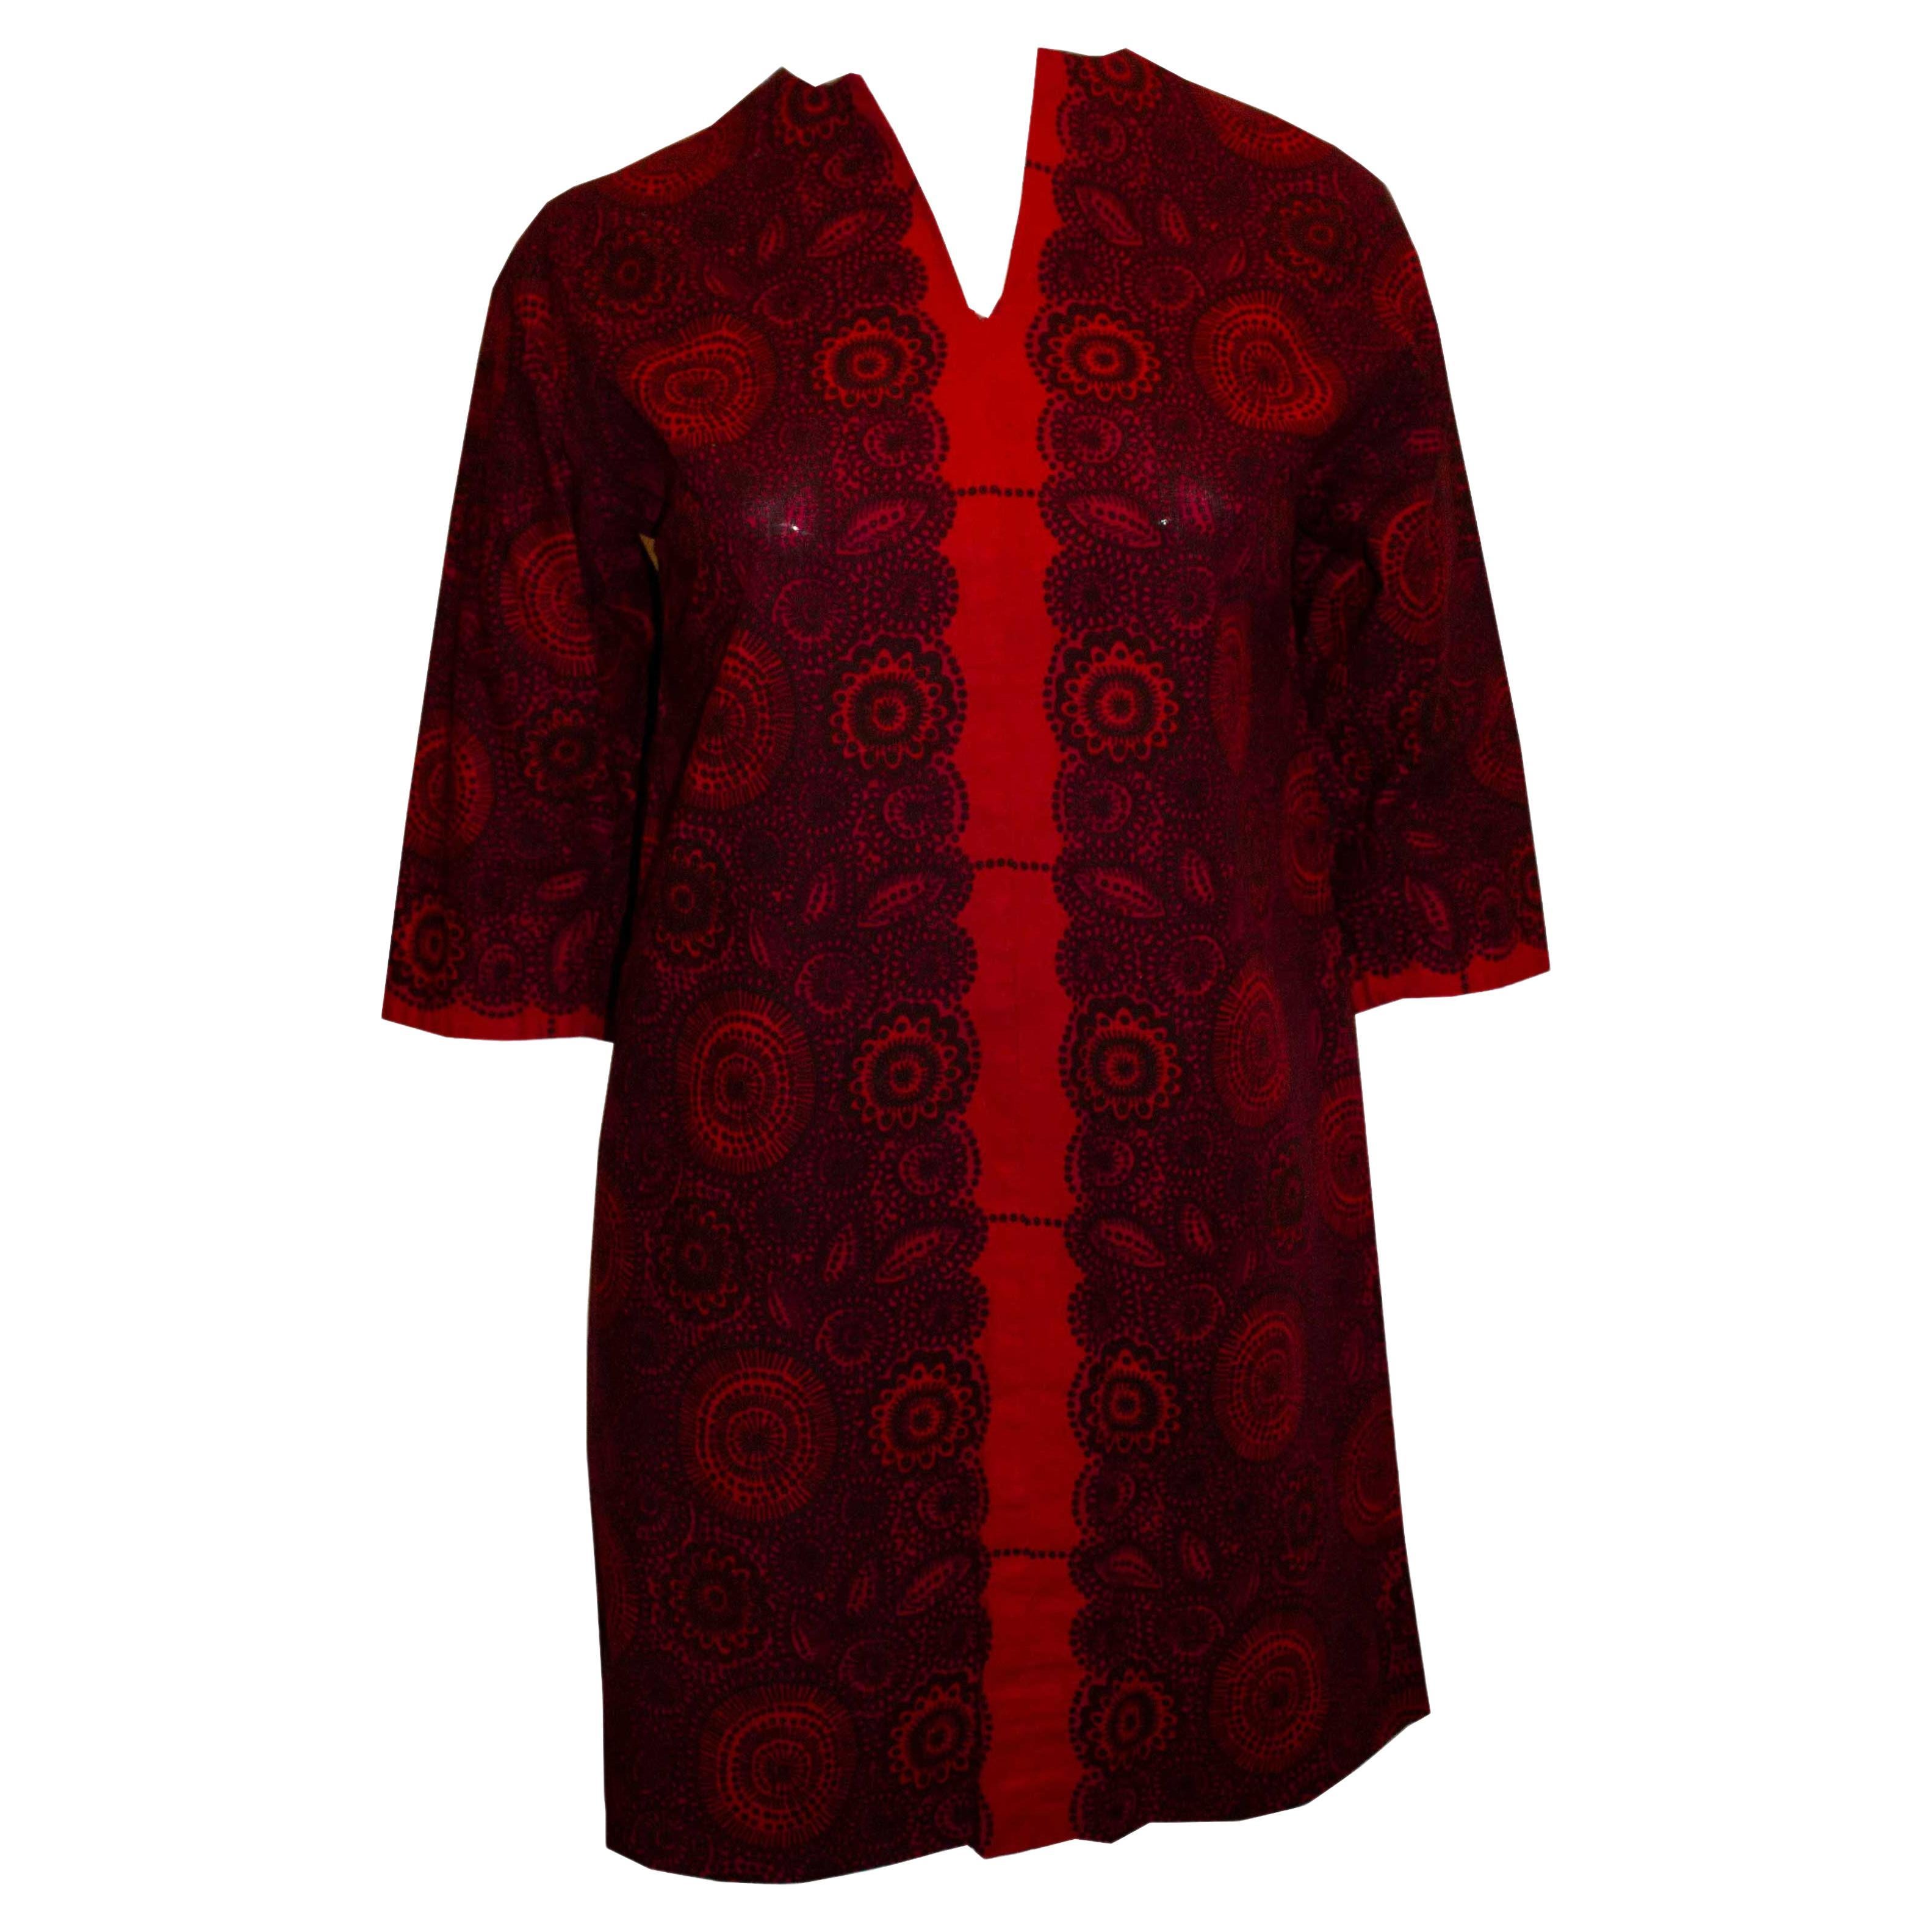  A Vintage,Just Right , Helsinki, Red Print Cotton Dress